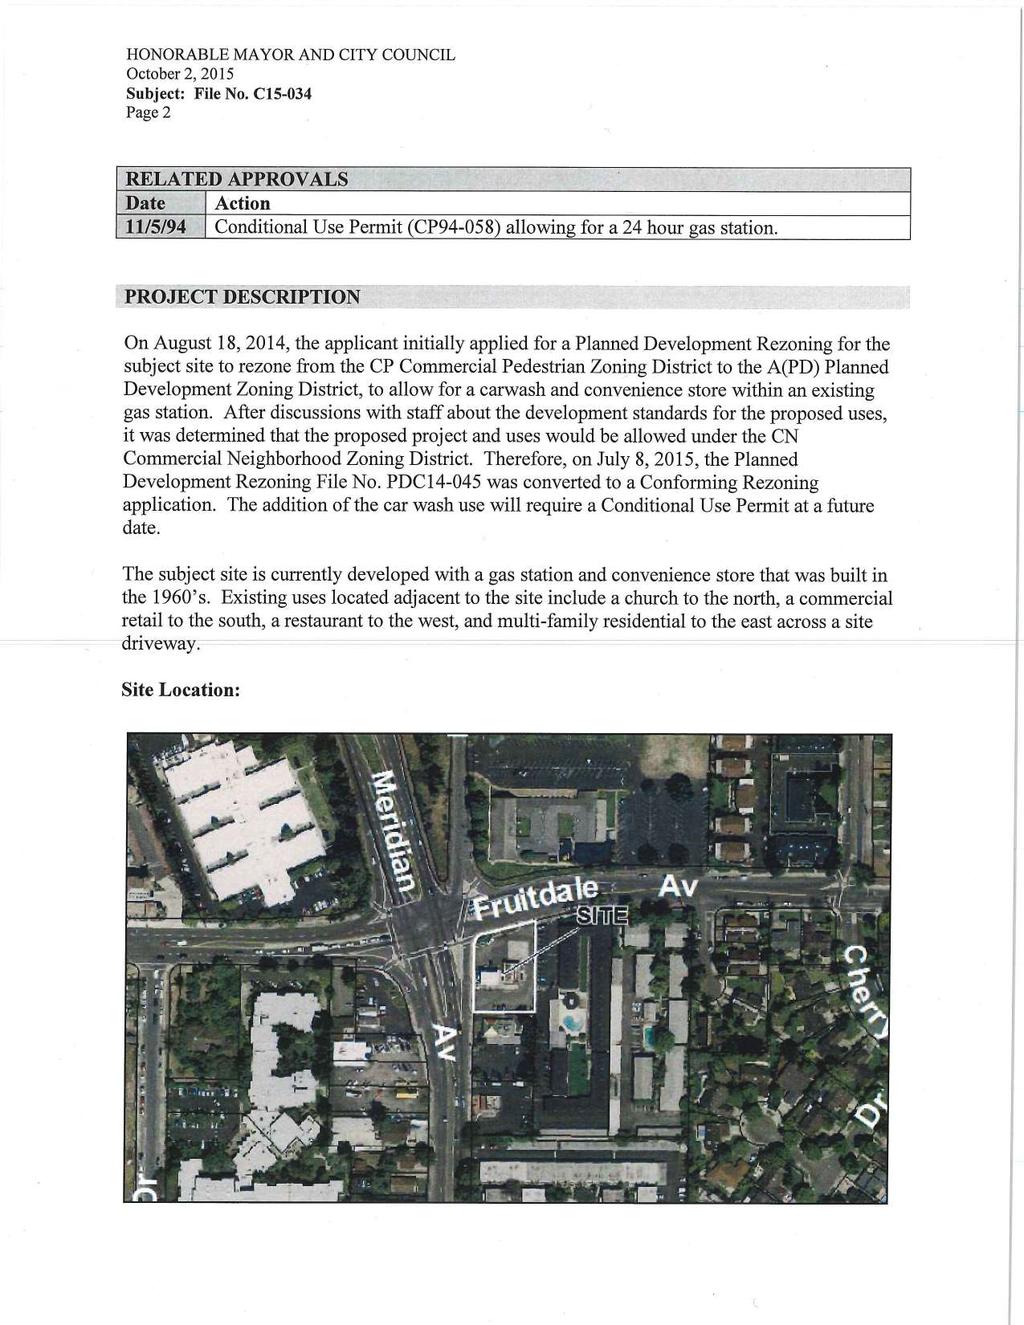 HONORABLE MAYOR AND CITY COUNCIL October 2, 2015 Subject: File No. C15-034 Page 2 RELATED APPROVALS Date Action 11/5/94 Conditional Use Permit (CP94-058) allowing for a 24 hour gas station.